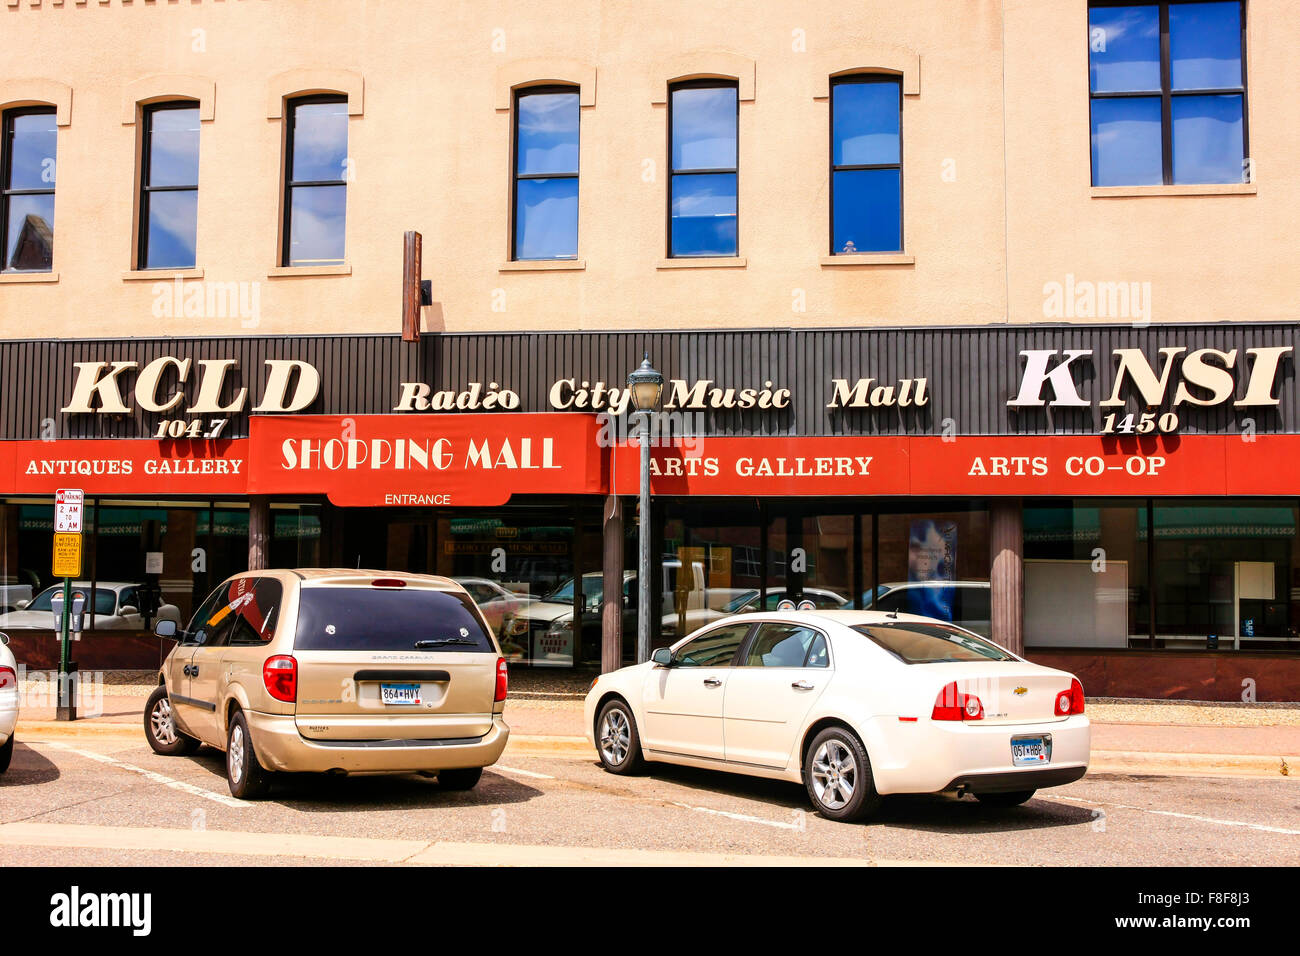 KCLD Radio City Music Hall Shopping Mall on W. Germain Street in the historic district of downtown St. Cloud Minnesota Stock Photo